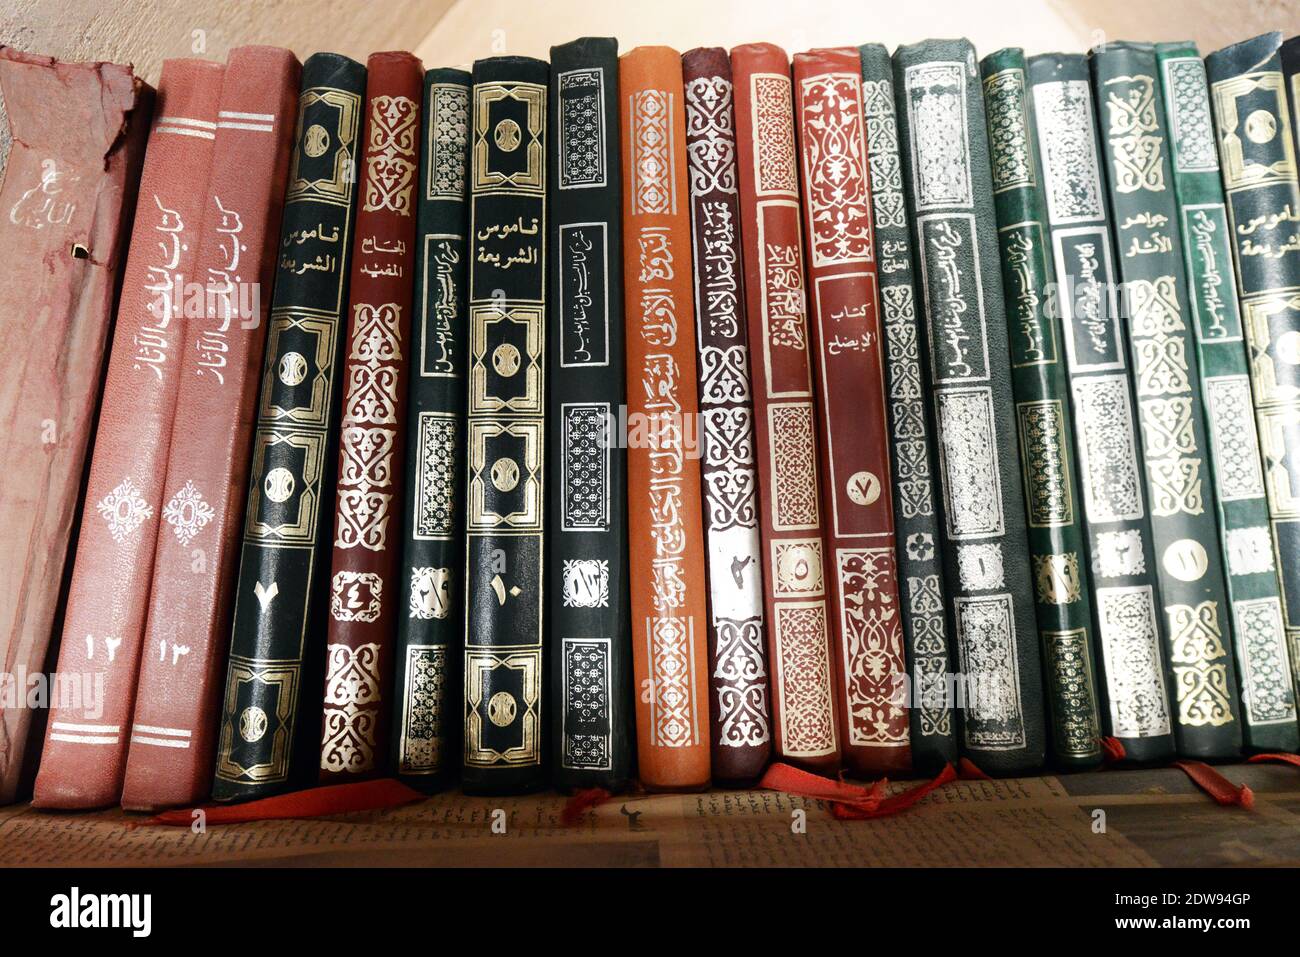 Islamic prayer books in a small mosque in the Sunaysilah Fort in Sur, Oman. Stock Photo